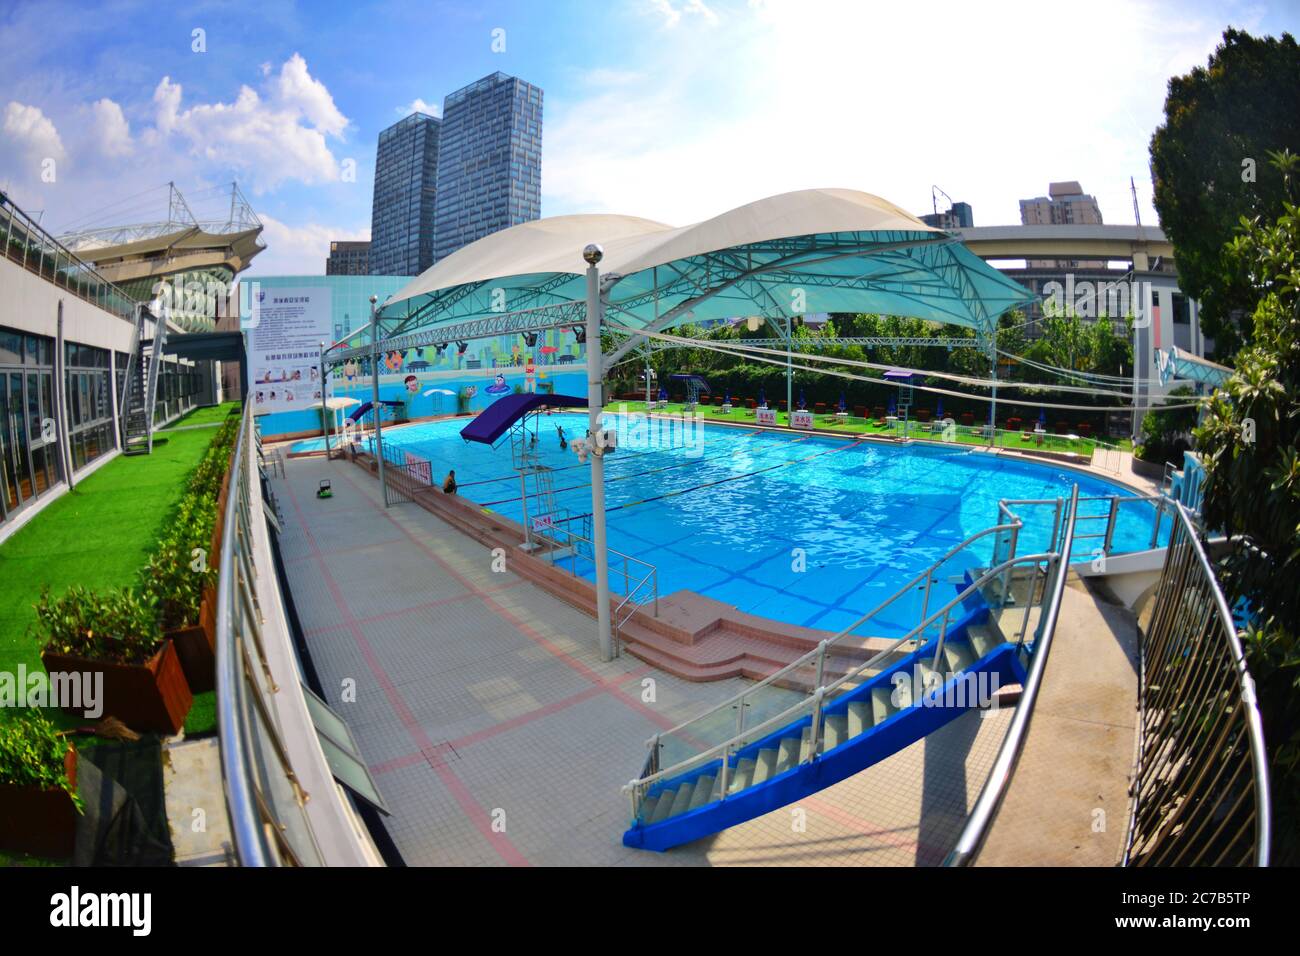 July 16, 2020, Shanghai, Shanghai, China: ShanghaiÃ¯Â¼Å'CHINA-Hongkou Swimming Pool, the oldest swimming pool in Shanghai, reopened on July 13 after a series of renovations. Hongkou swimming pool was founded in 1922, the eastern jiangwan road 500, east of one hundred, lu xun park, south reliance modern hongkou football stadium, has a history of 98 years, is the earliest open in Shanghai public swimming pool, after nearly hundred years vicissitudes of life change, as the public fitness, leisure, entertainment, summer activities, known to all, in order to make the famous old stadium continue to Stock Photo